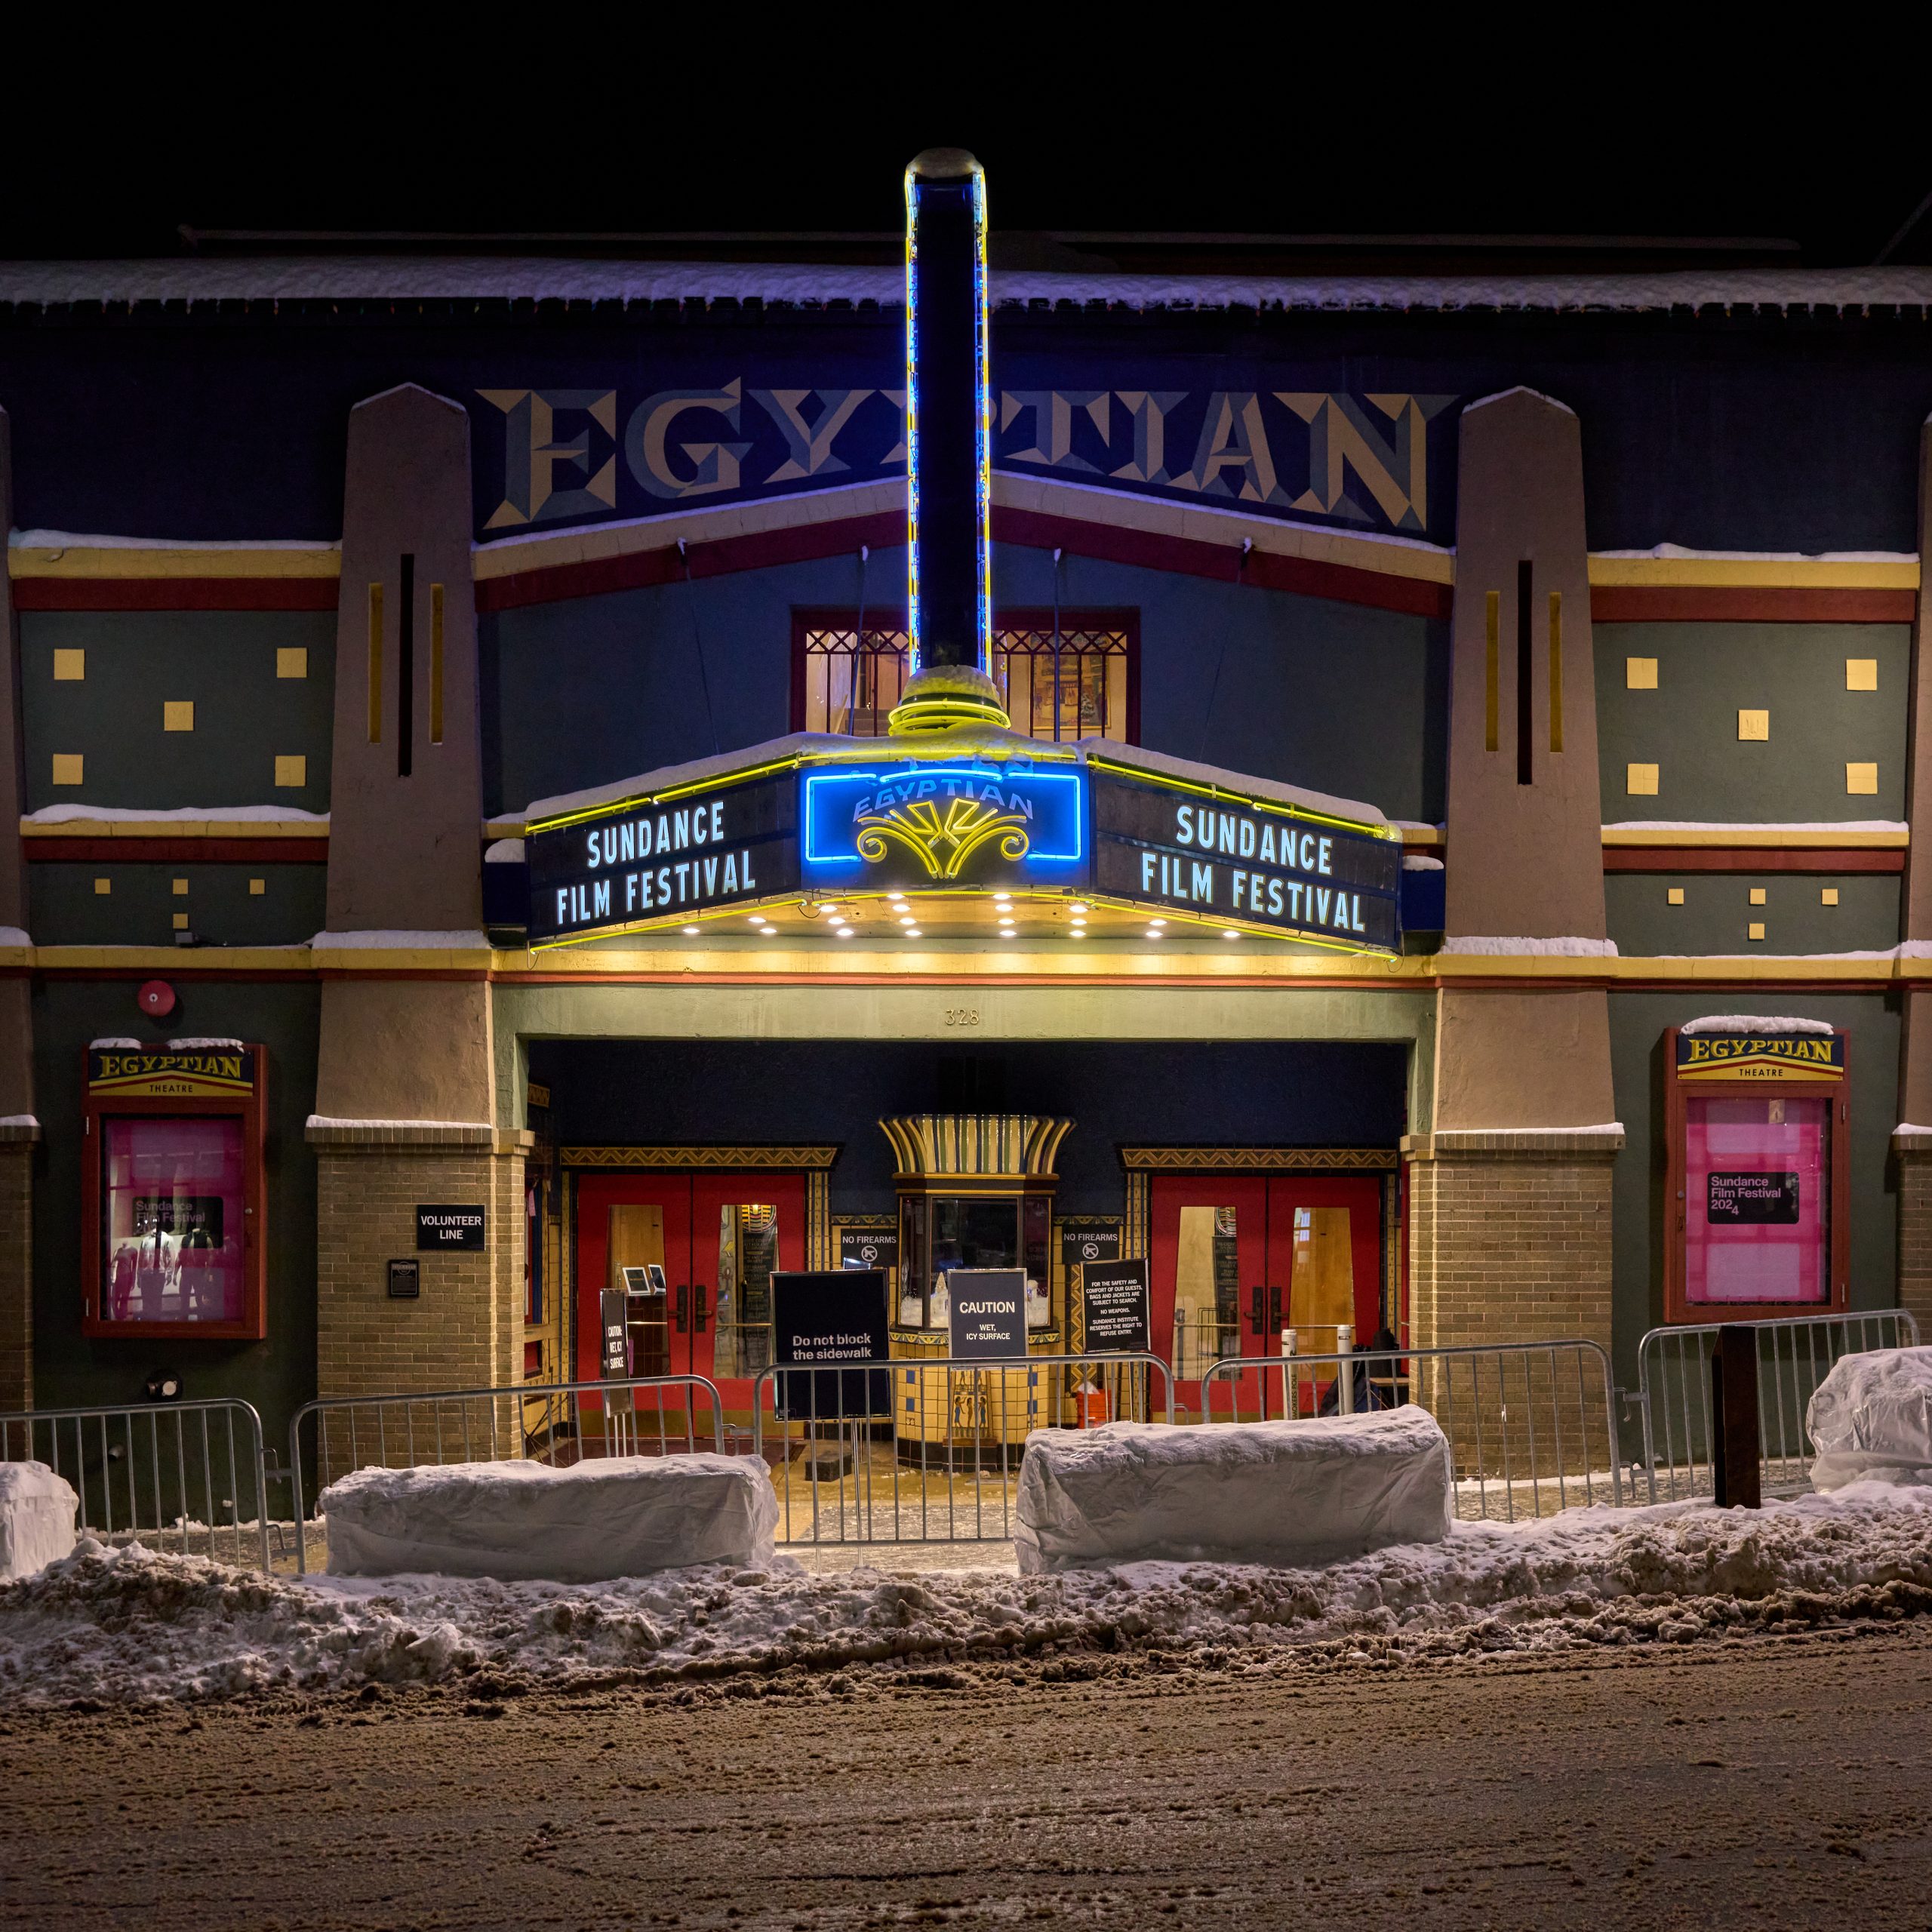 The Egyptian Theatre in Park City, Utah, on the night prior to the Sundance Film Festival 2024